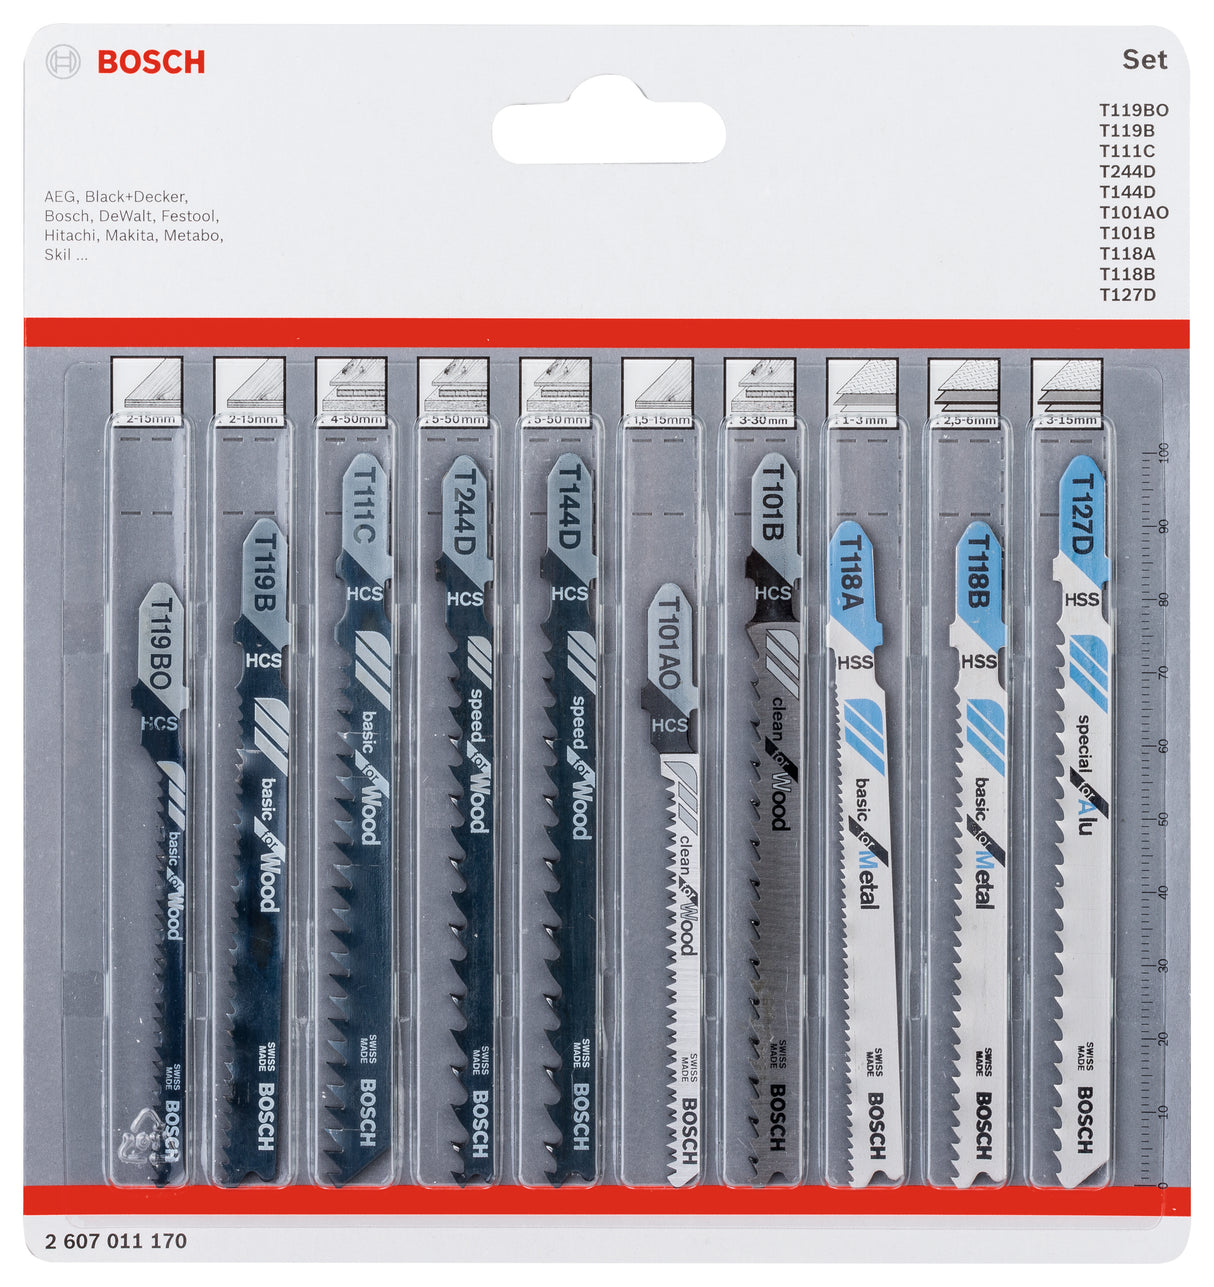 Bosch Professional Jigsaw Blade Set - 10 Pieces for Wood and Metal